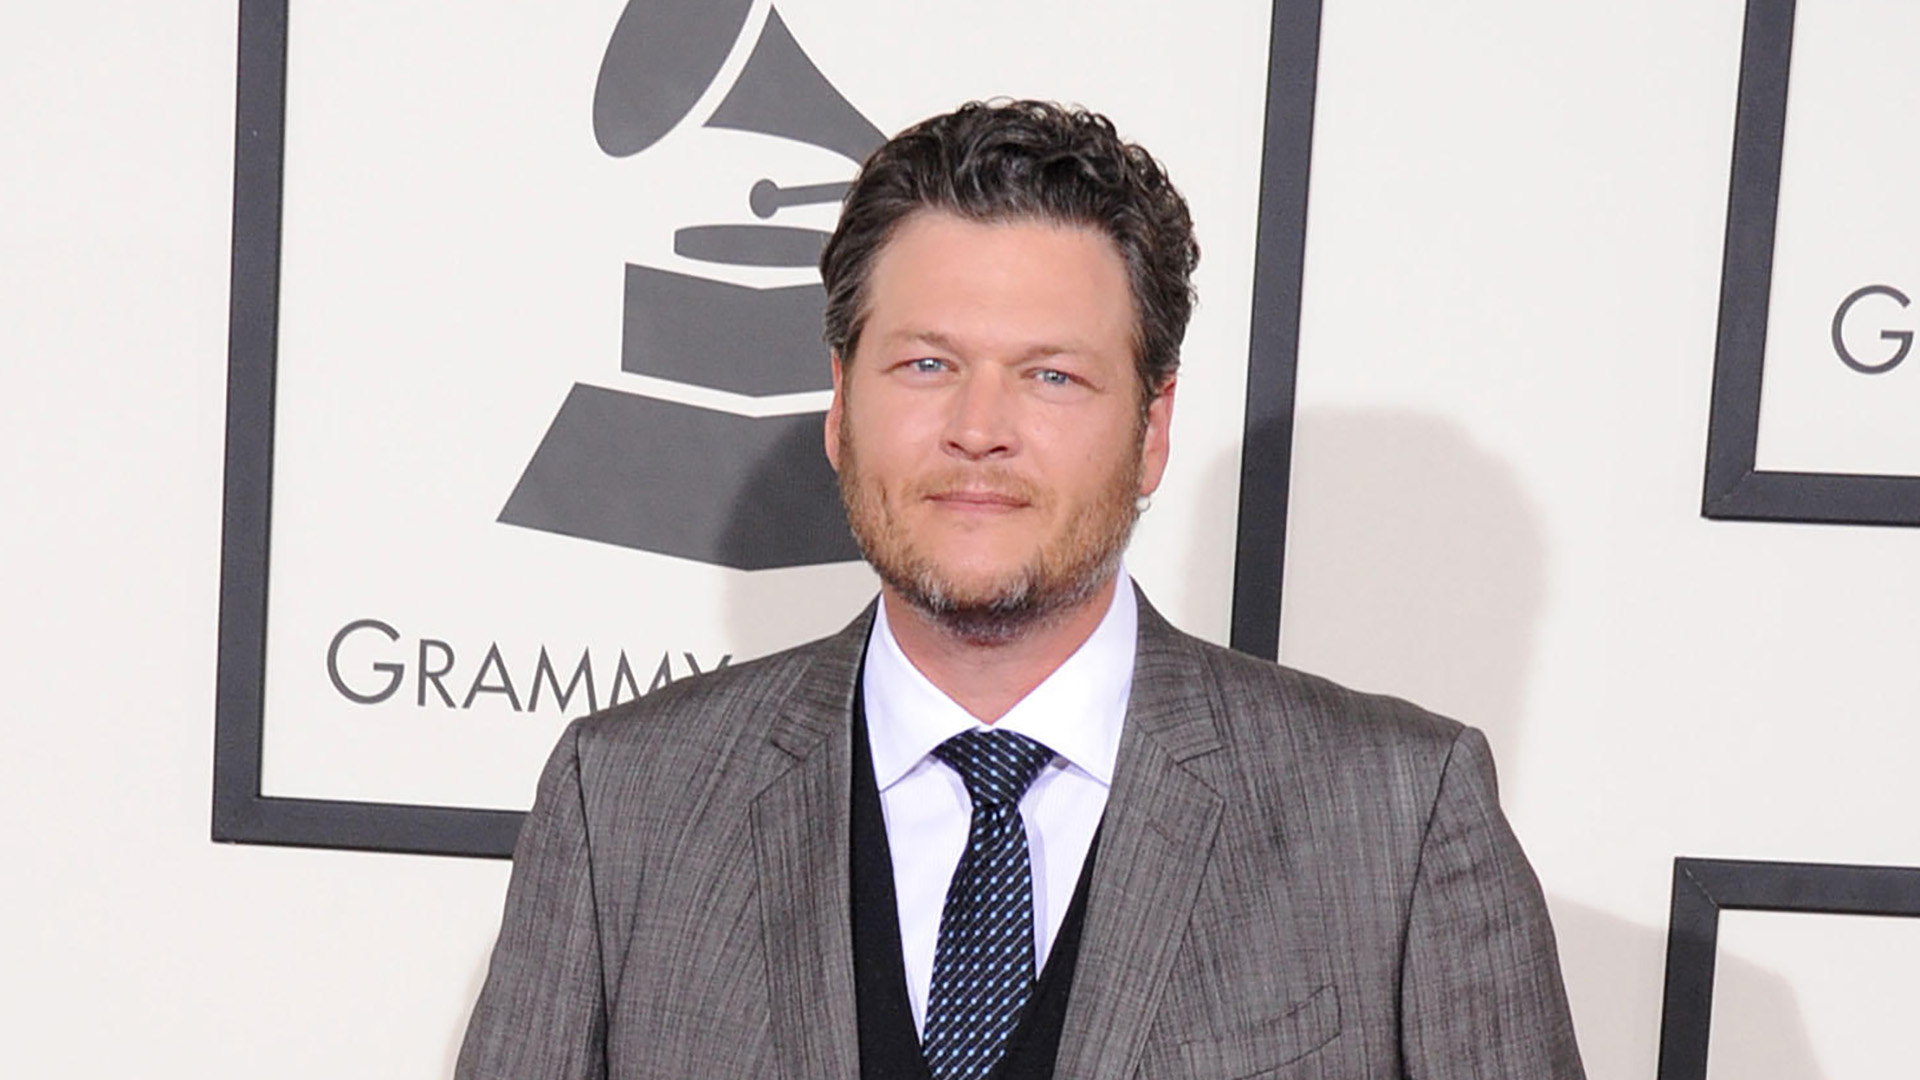 End of an Era: Fans Beg NBC to Cancel The Voice After Blake Shelton's Departure